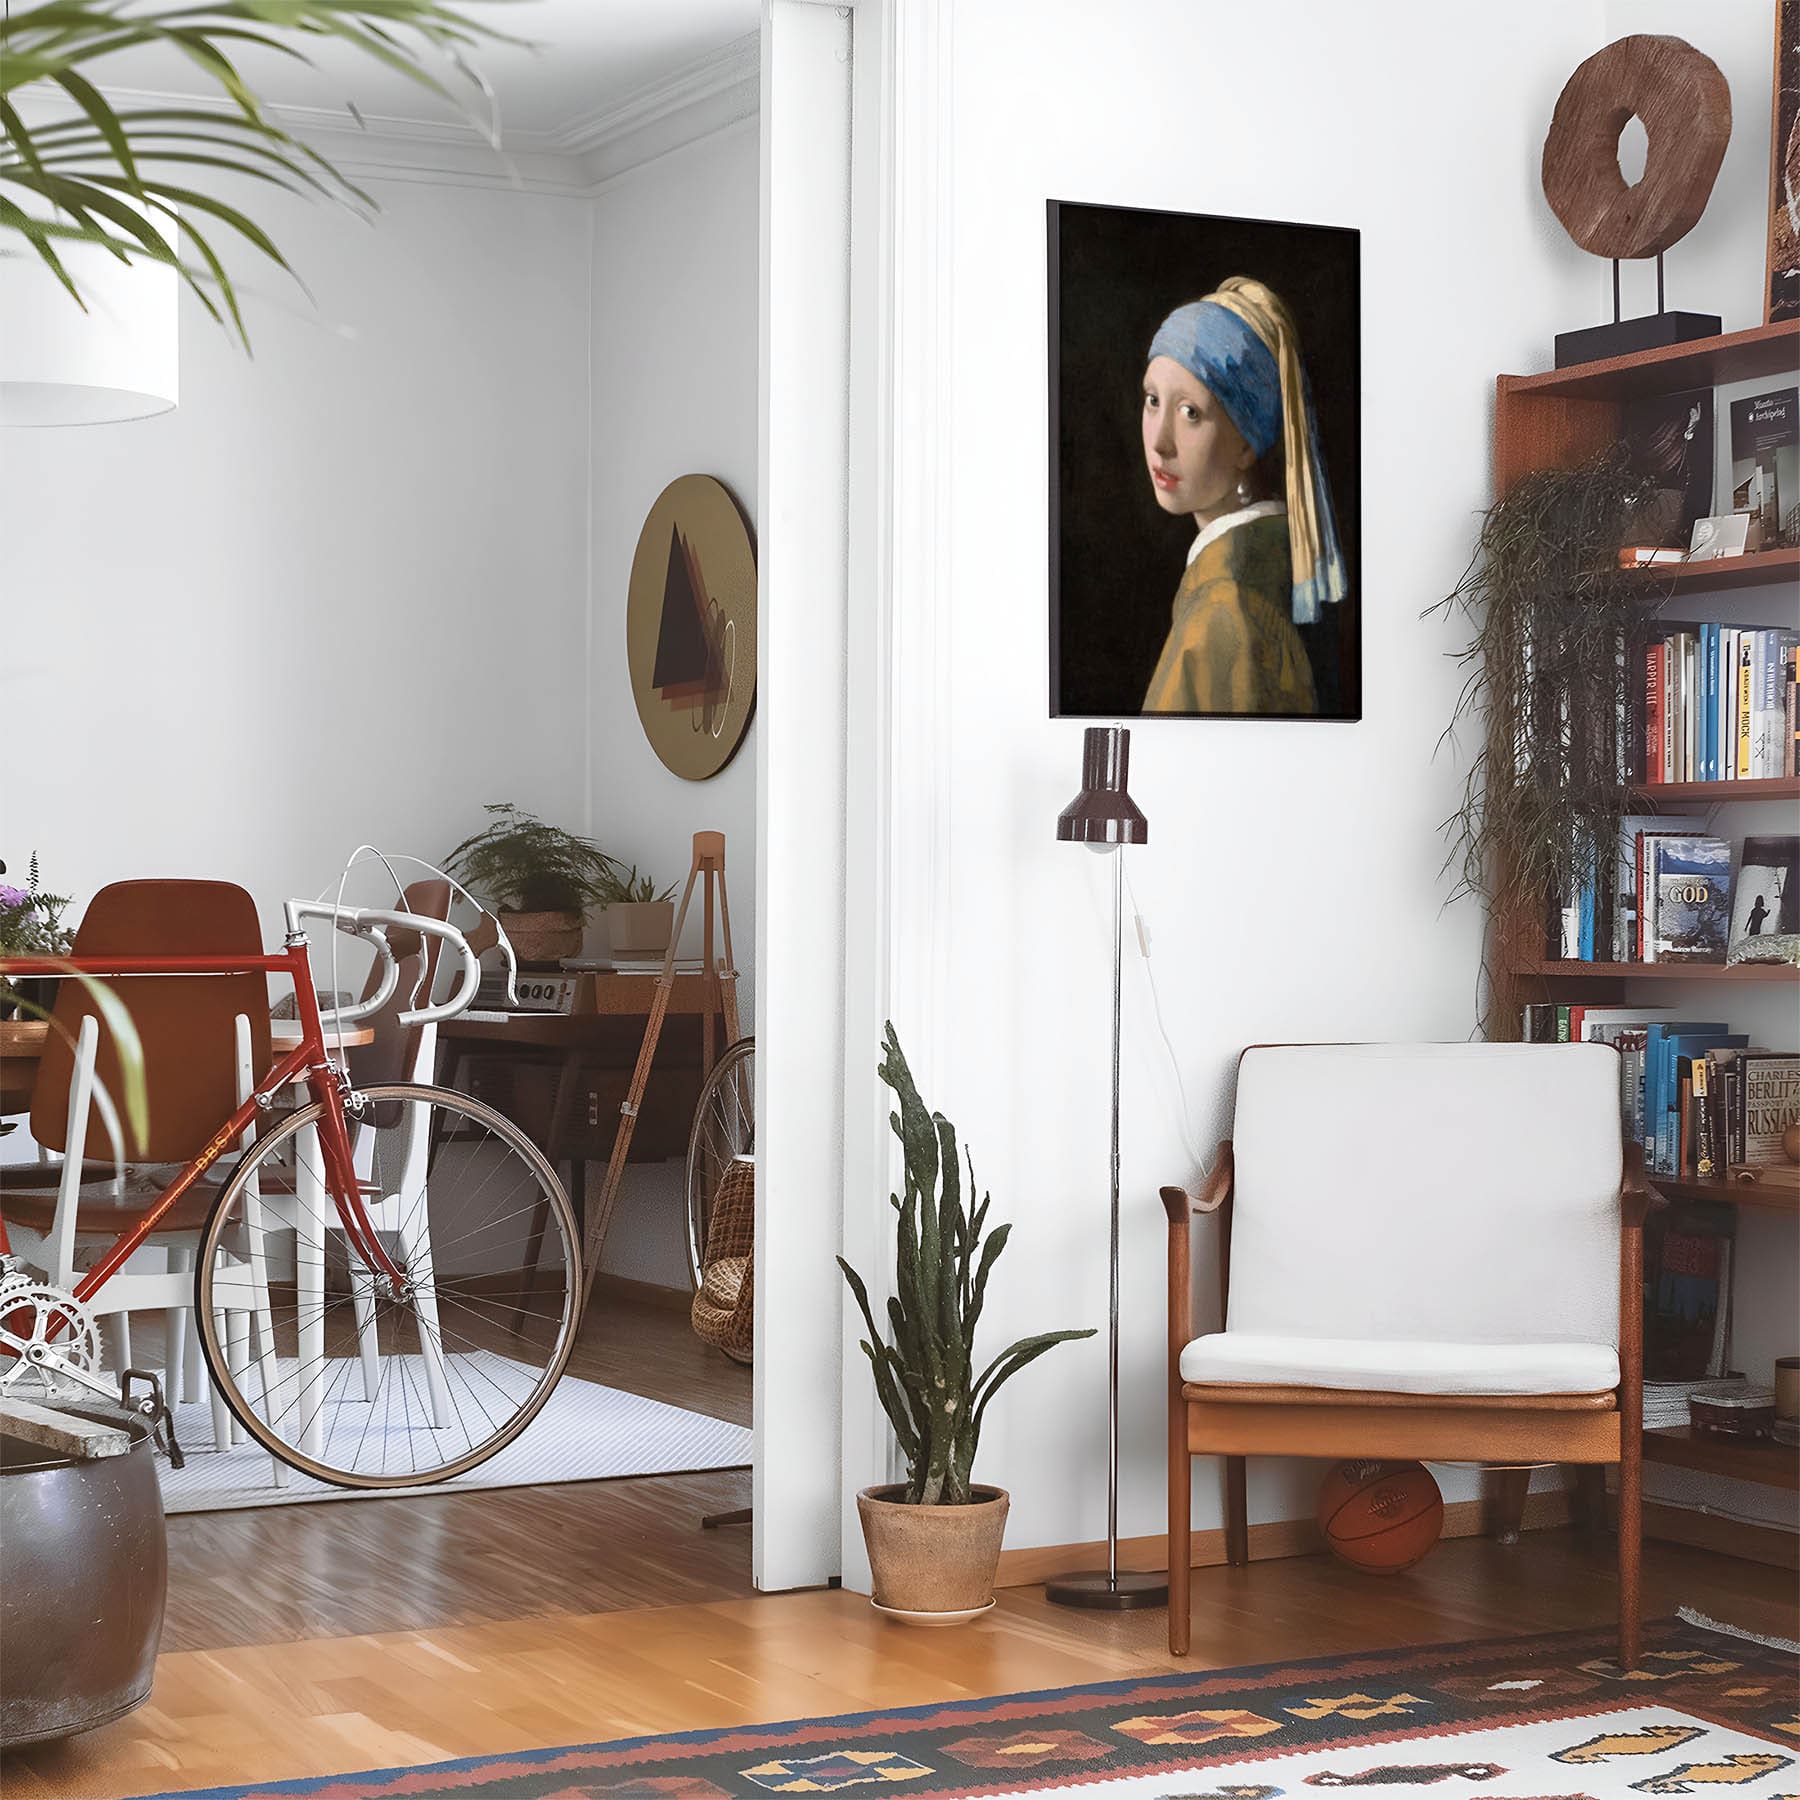 Eclectic living room with a road bike, bookshelf and house plants that features framed artwork of a Famous Vermeer above a chair and lamp